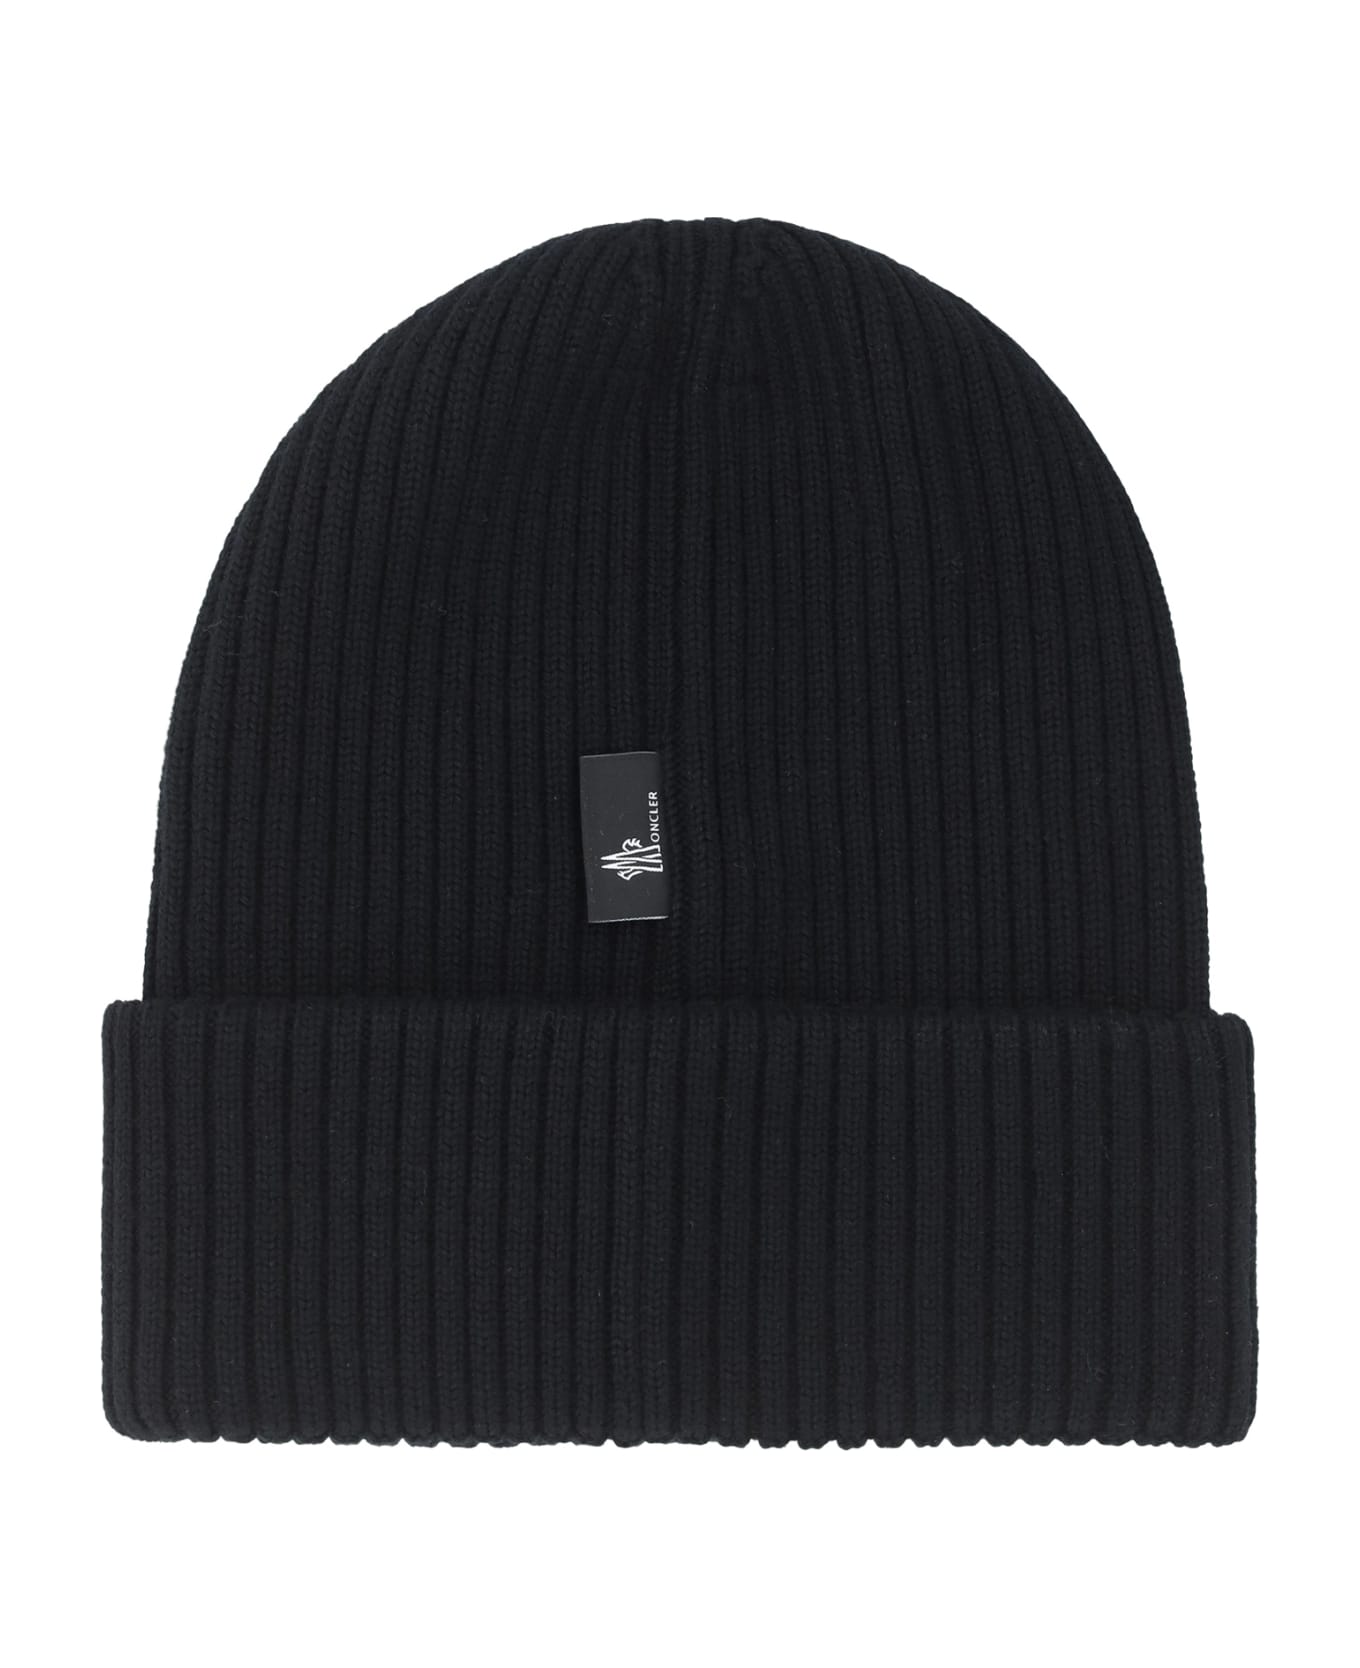 Moncler Grenoble Tricot Beanie Hat